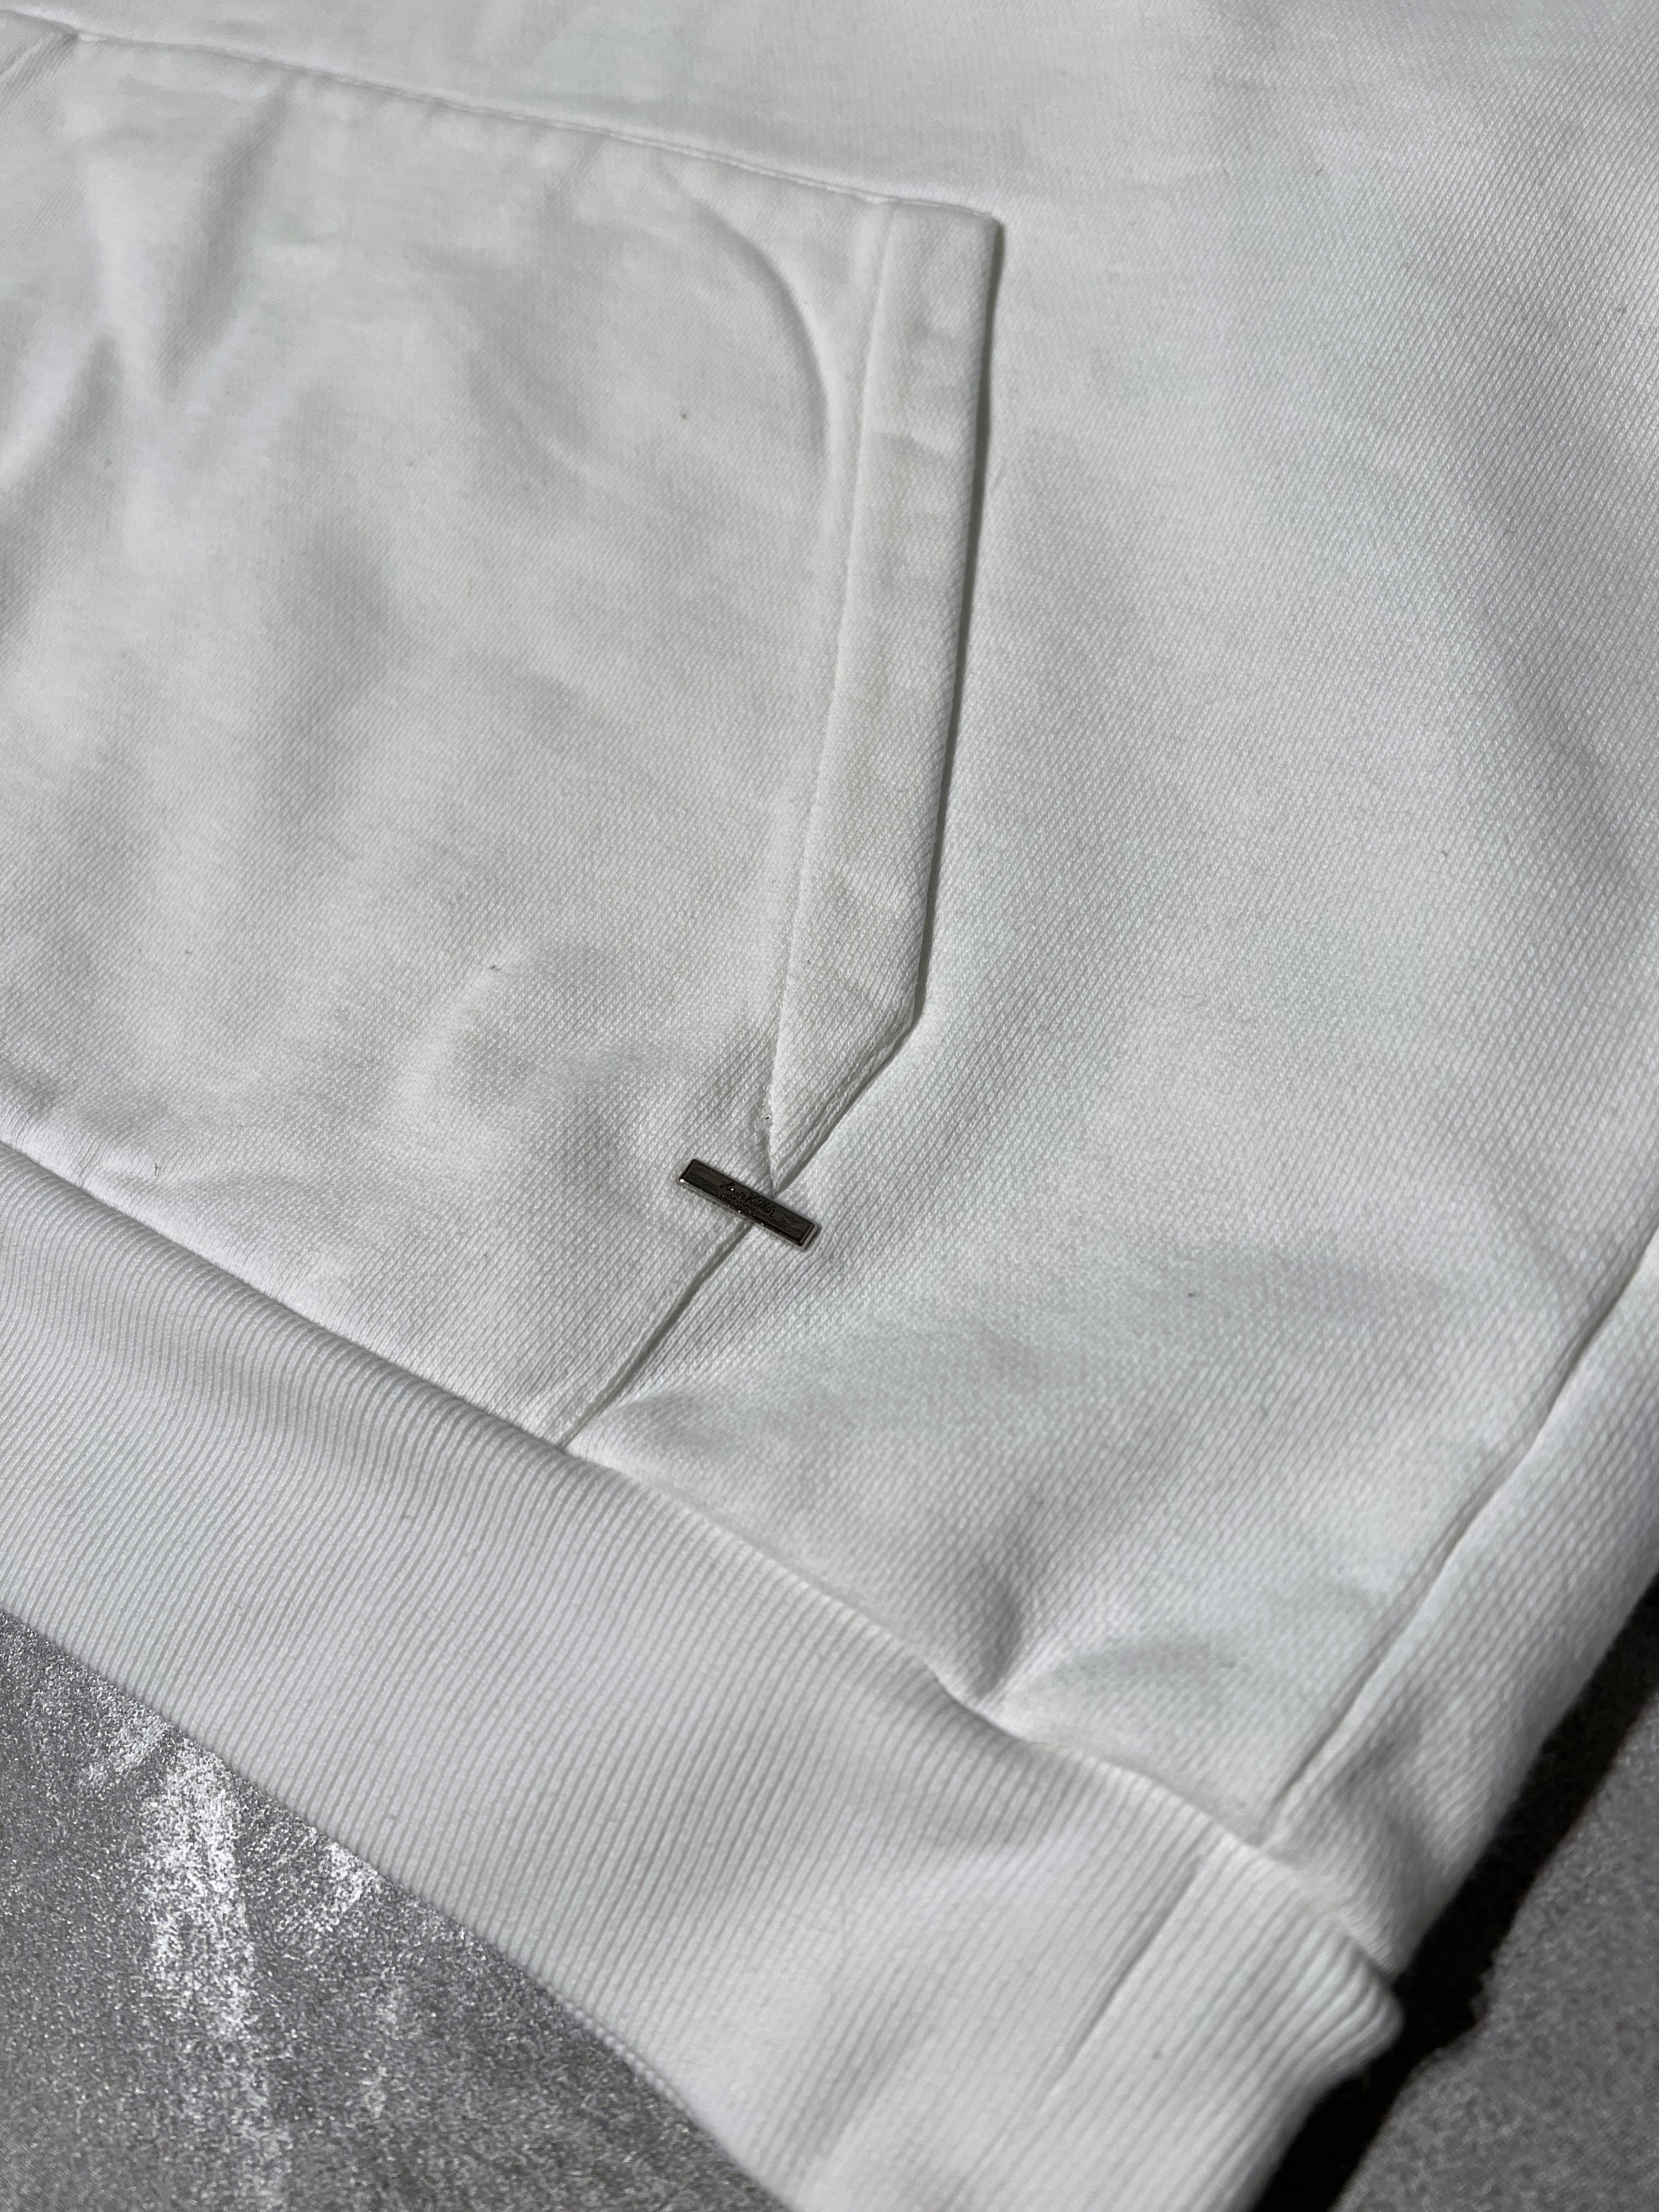 Louis Vuitton Louis Vuitton Staples Edition Inside Out Cashmere Hoodie, White, XXL Stock Required Confirmation